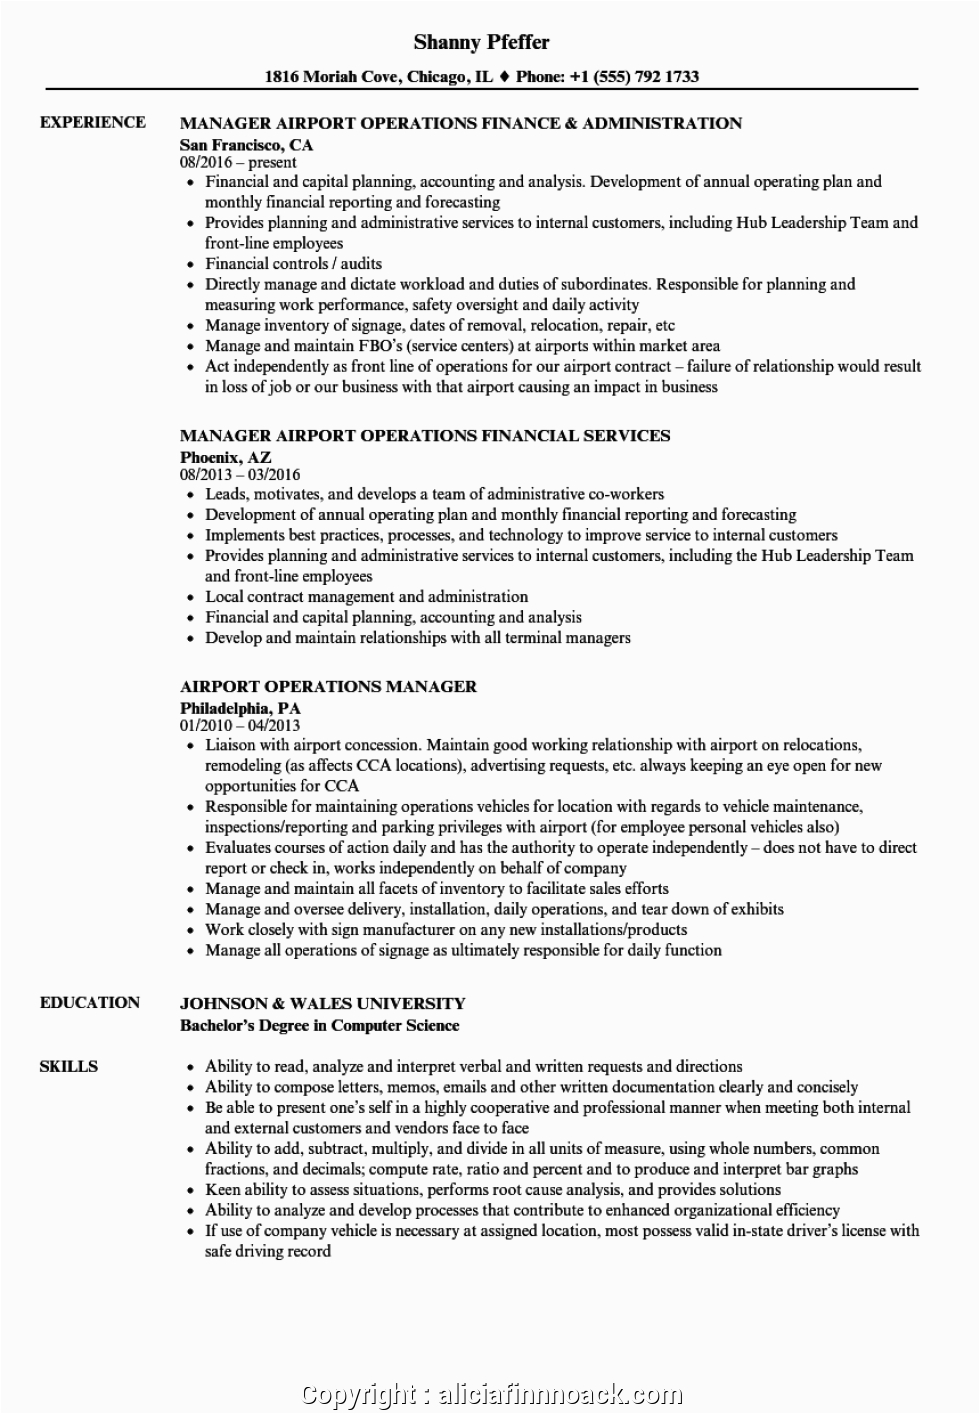 Resume Sample for Airport Ground Staff top Airport Operations Manager Resume Airport Operations